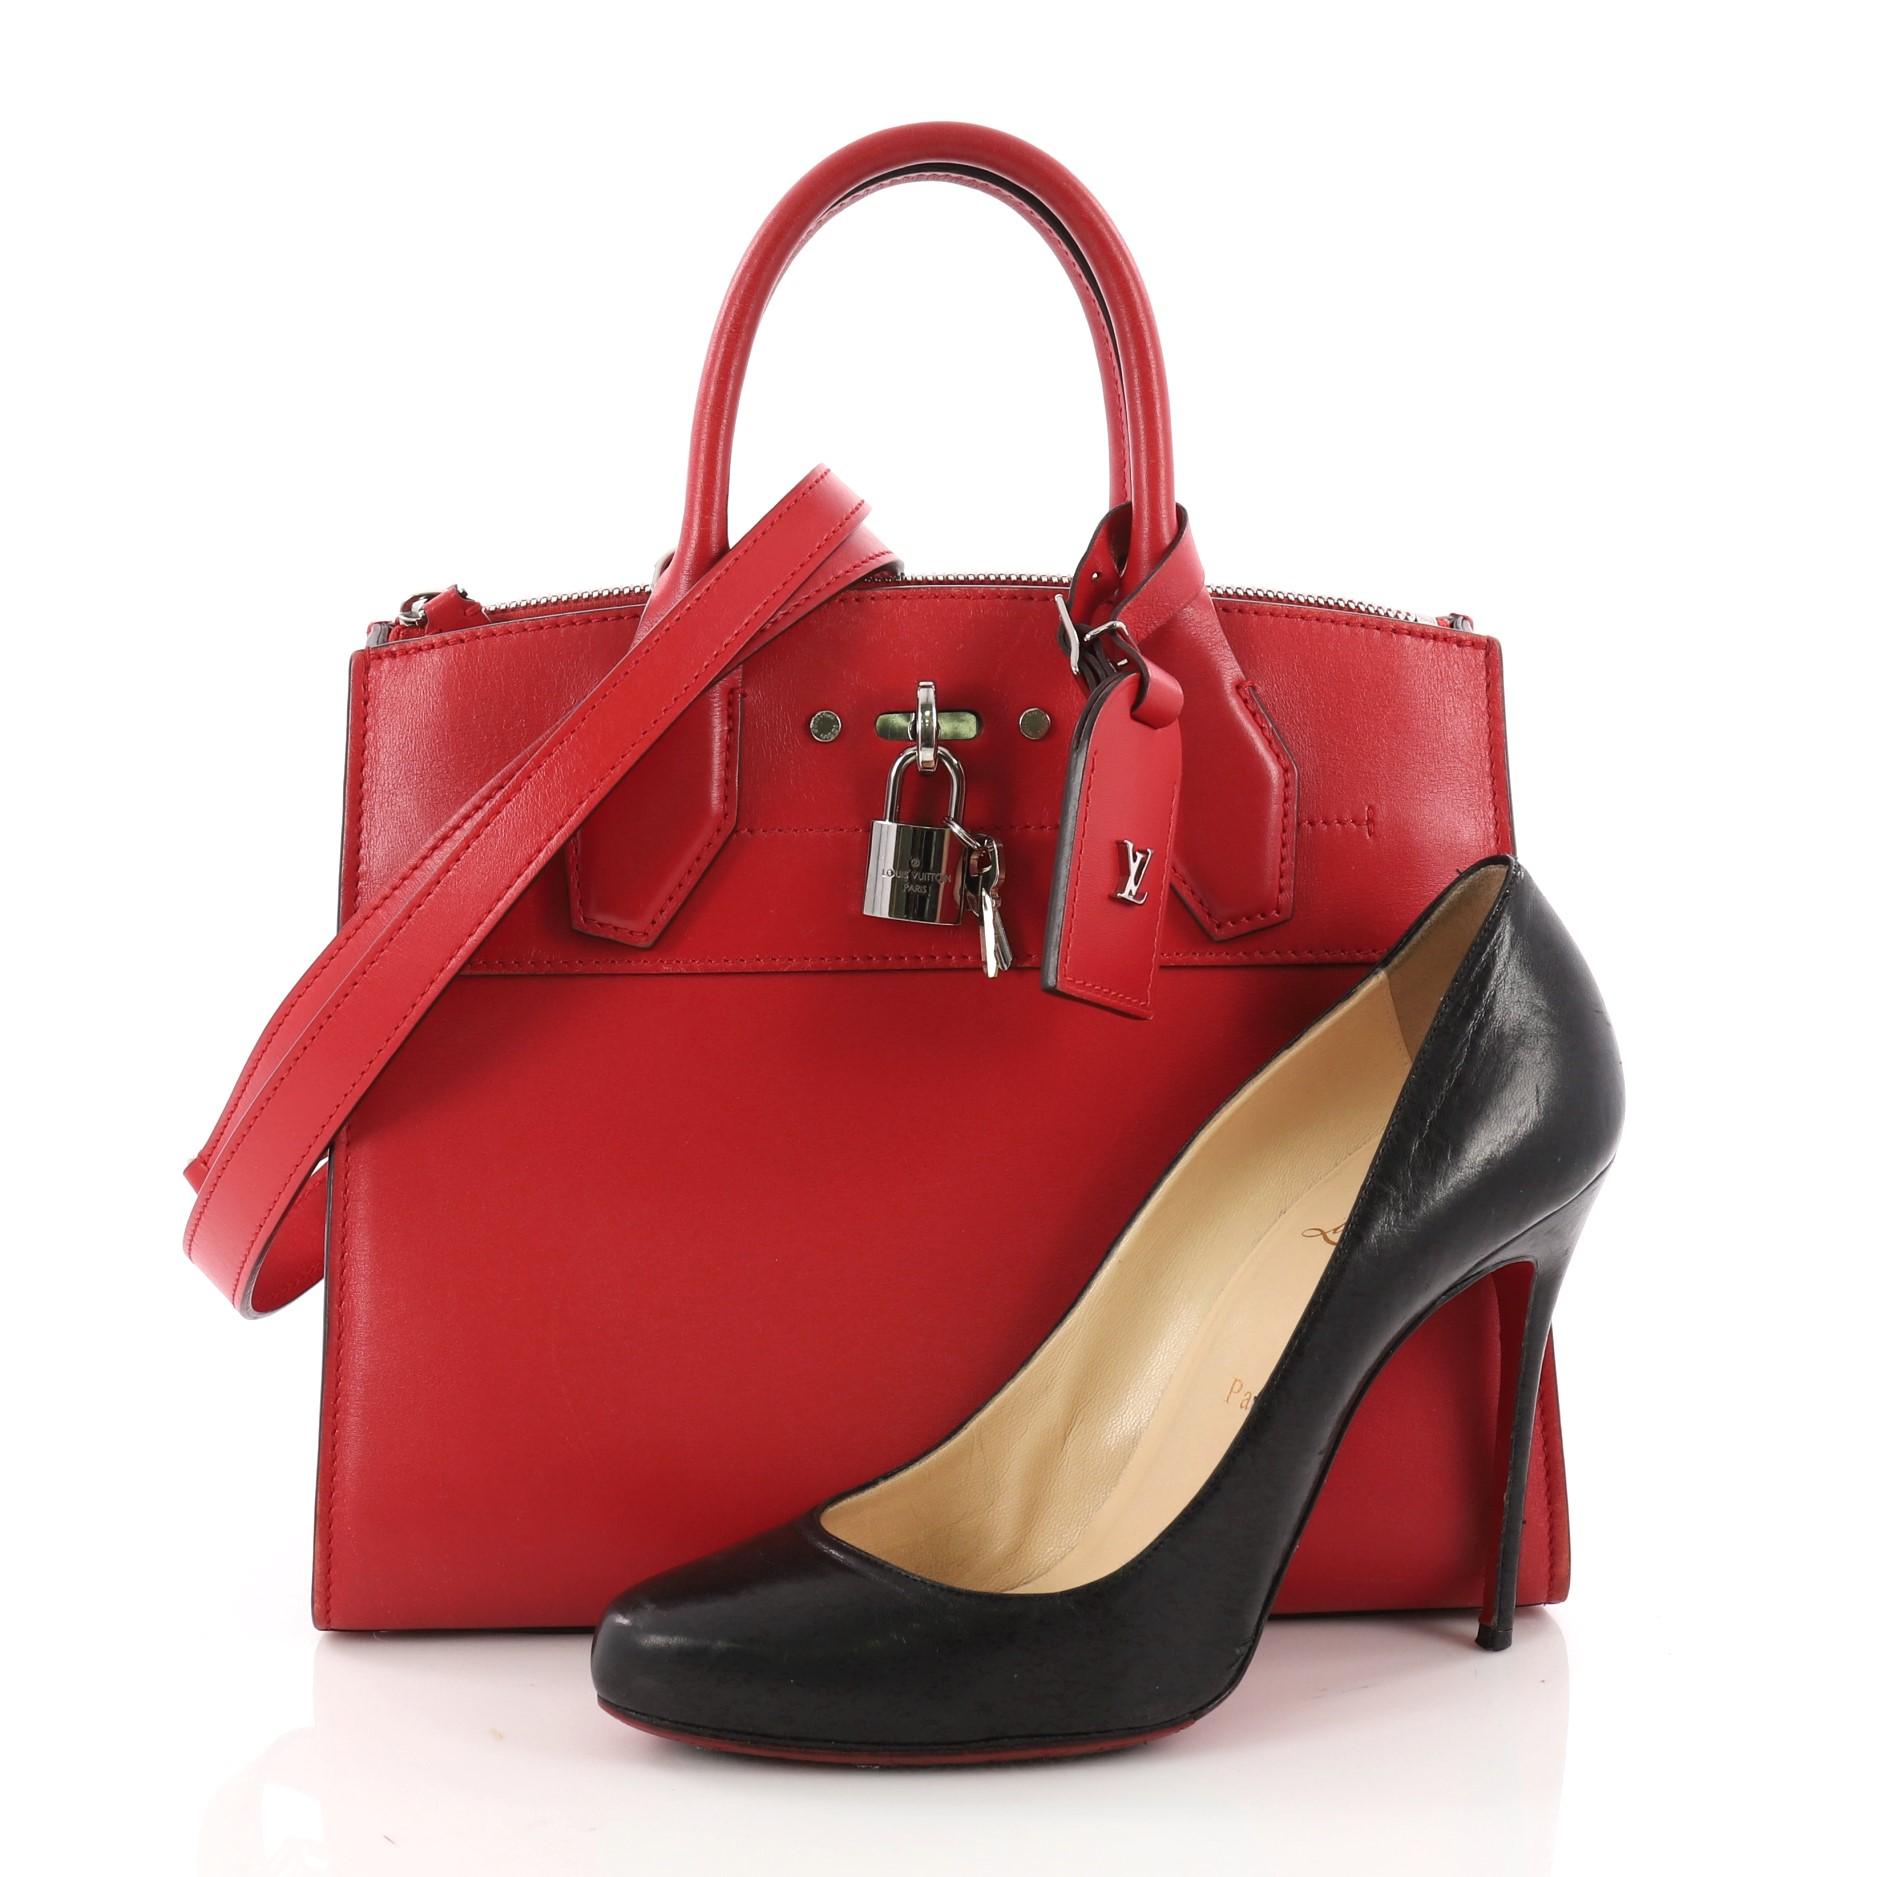 This authentic Louis Vuitton City Steamer Handbag Leather PM is a versatile bag fit for a dressy as well as a casual day out. Crafted in red leather, this modern day tote features dual-rolled leather handles, front central lock with LV stamped logo,